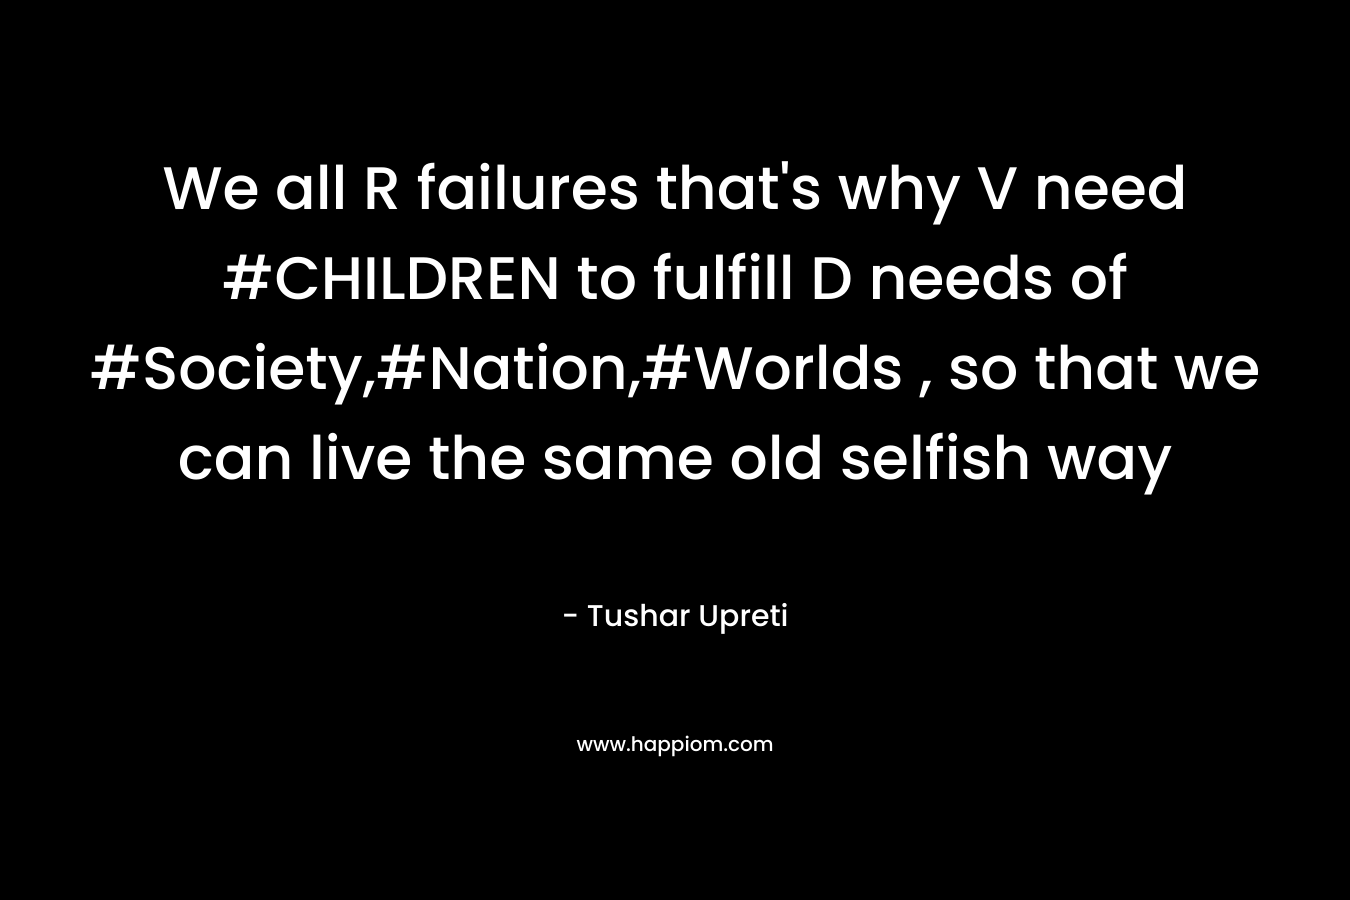 We all R failures that's why V need #CHILDREN to fulfill D needs of #Society,#Nation,#Worlds , so that we can live the same old selfish way